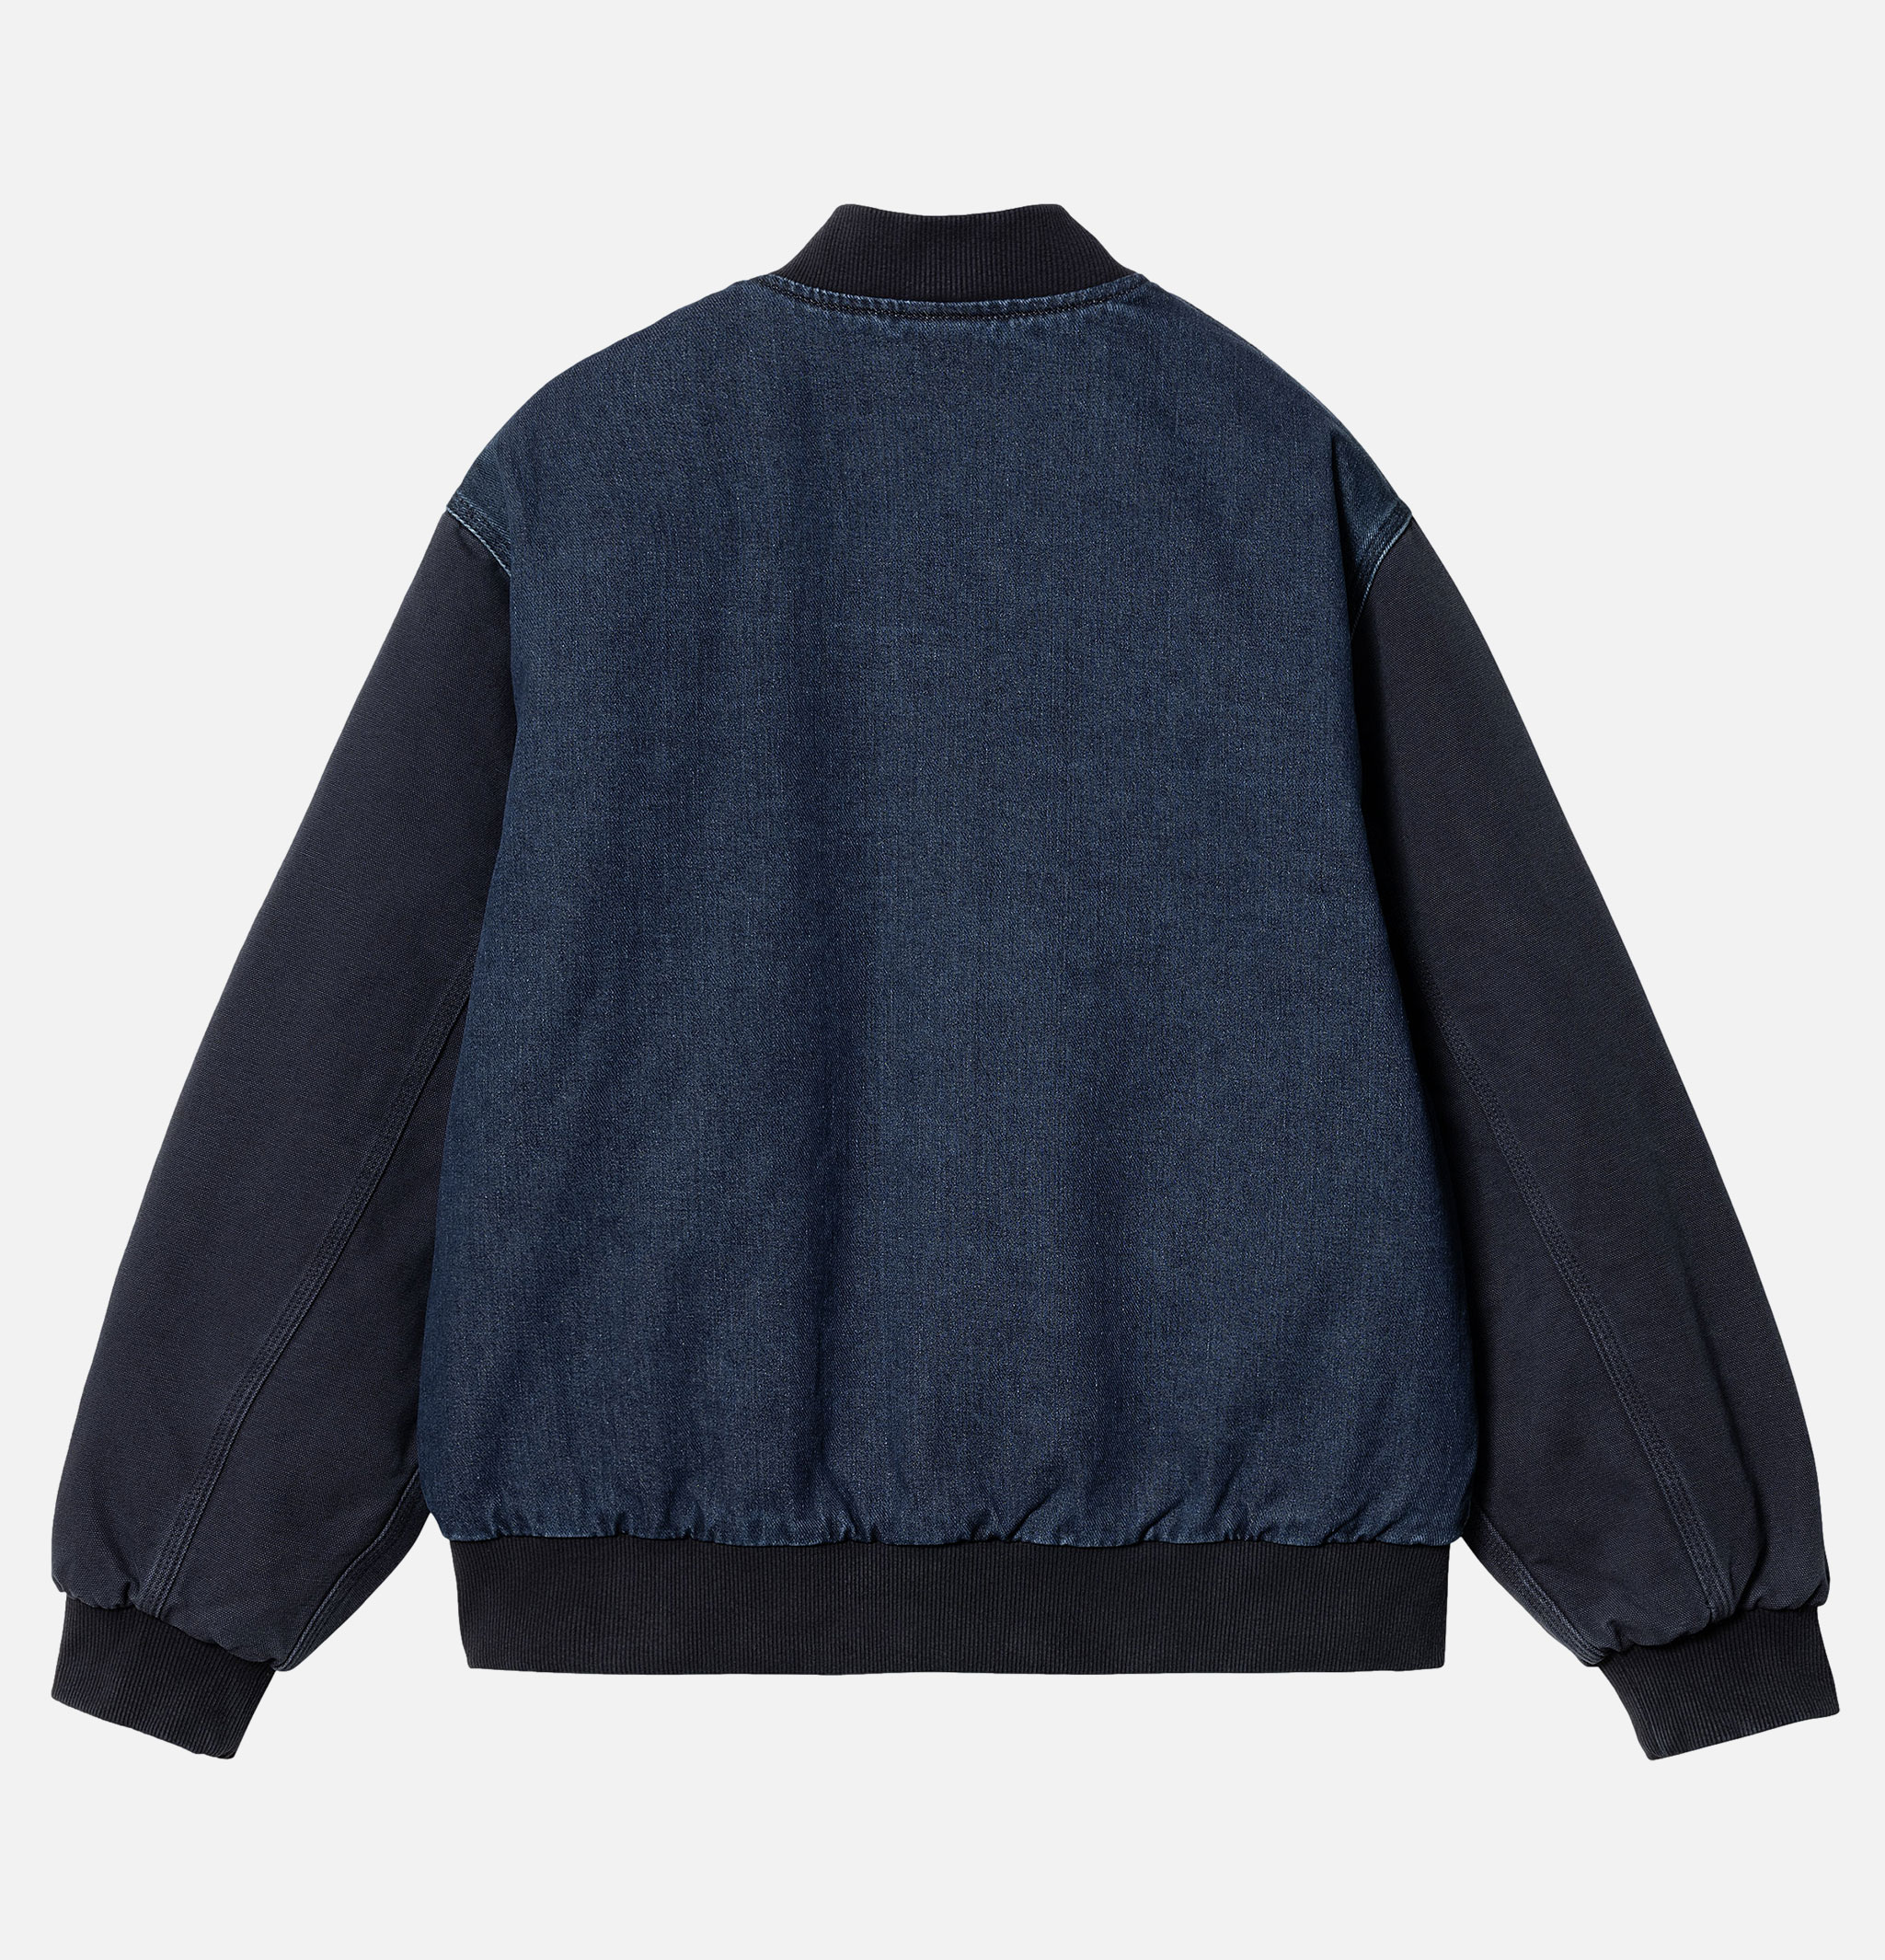 Carhartt WIP Paxon Bomber Navy Stone Washed